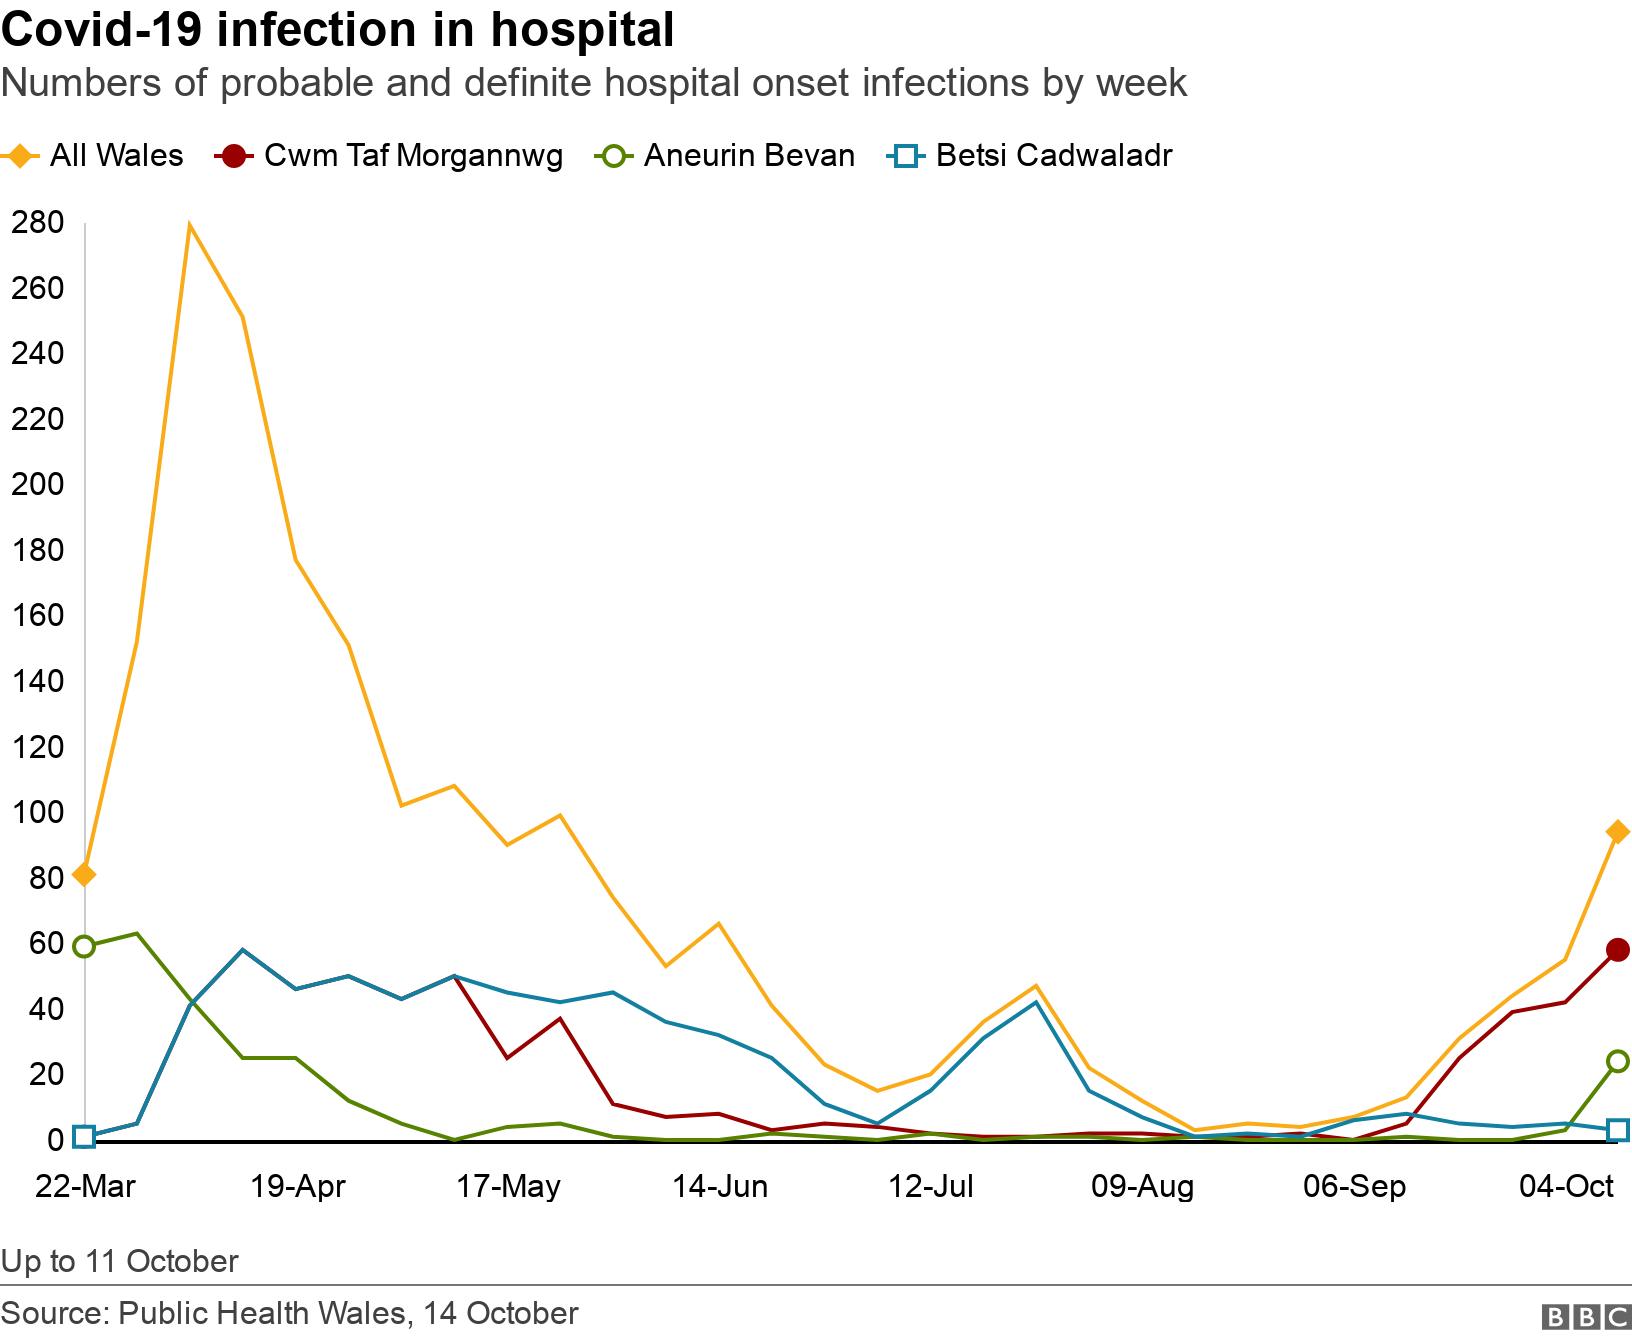 Covid-19 infection in hospital. Numbers of probable and definite hospital onset infections by week. Up to 11 October.